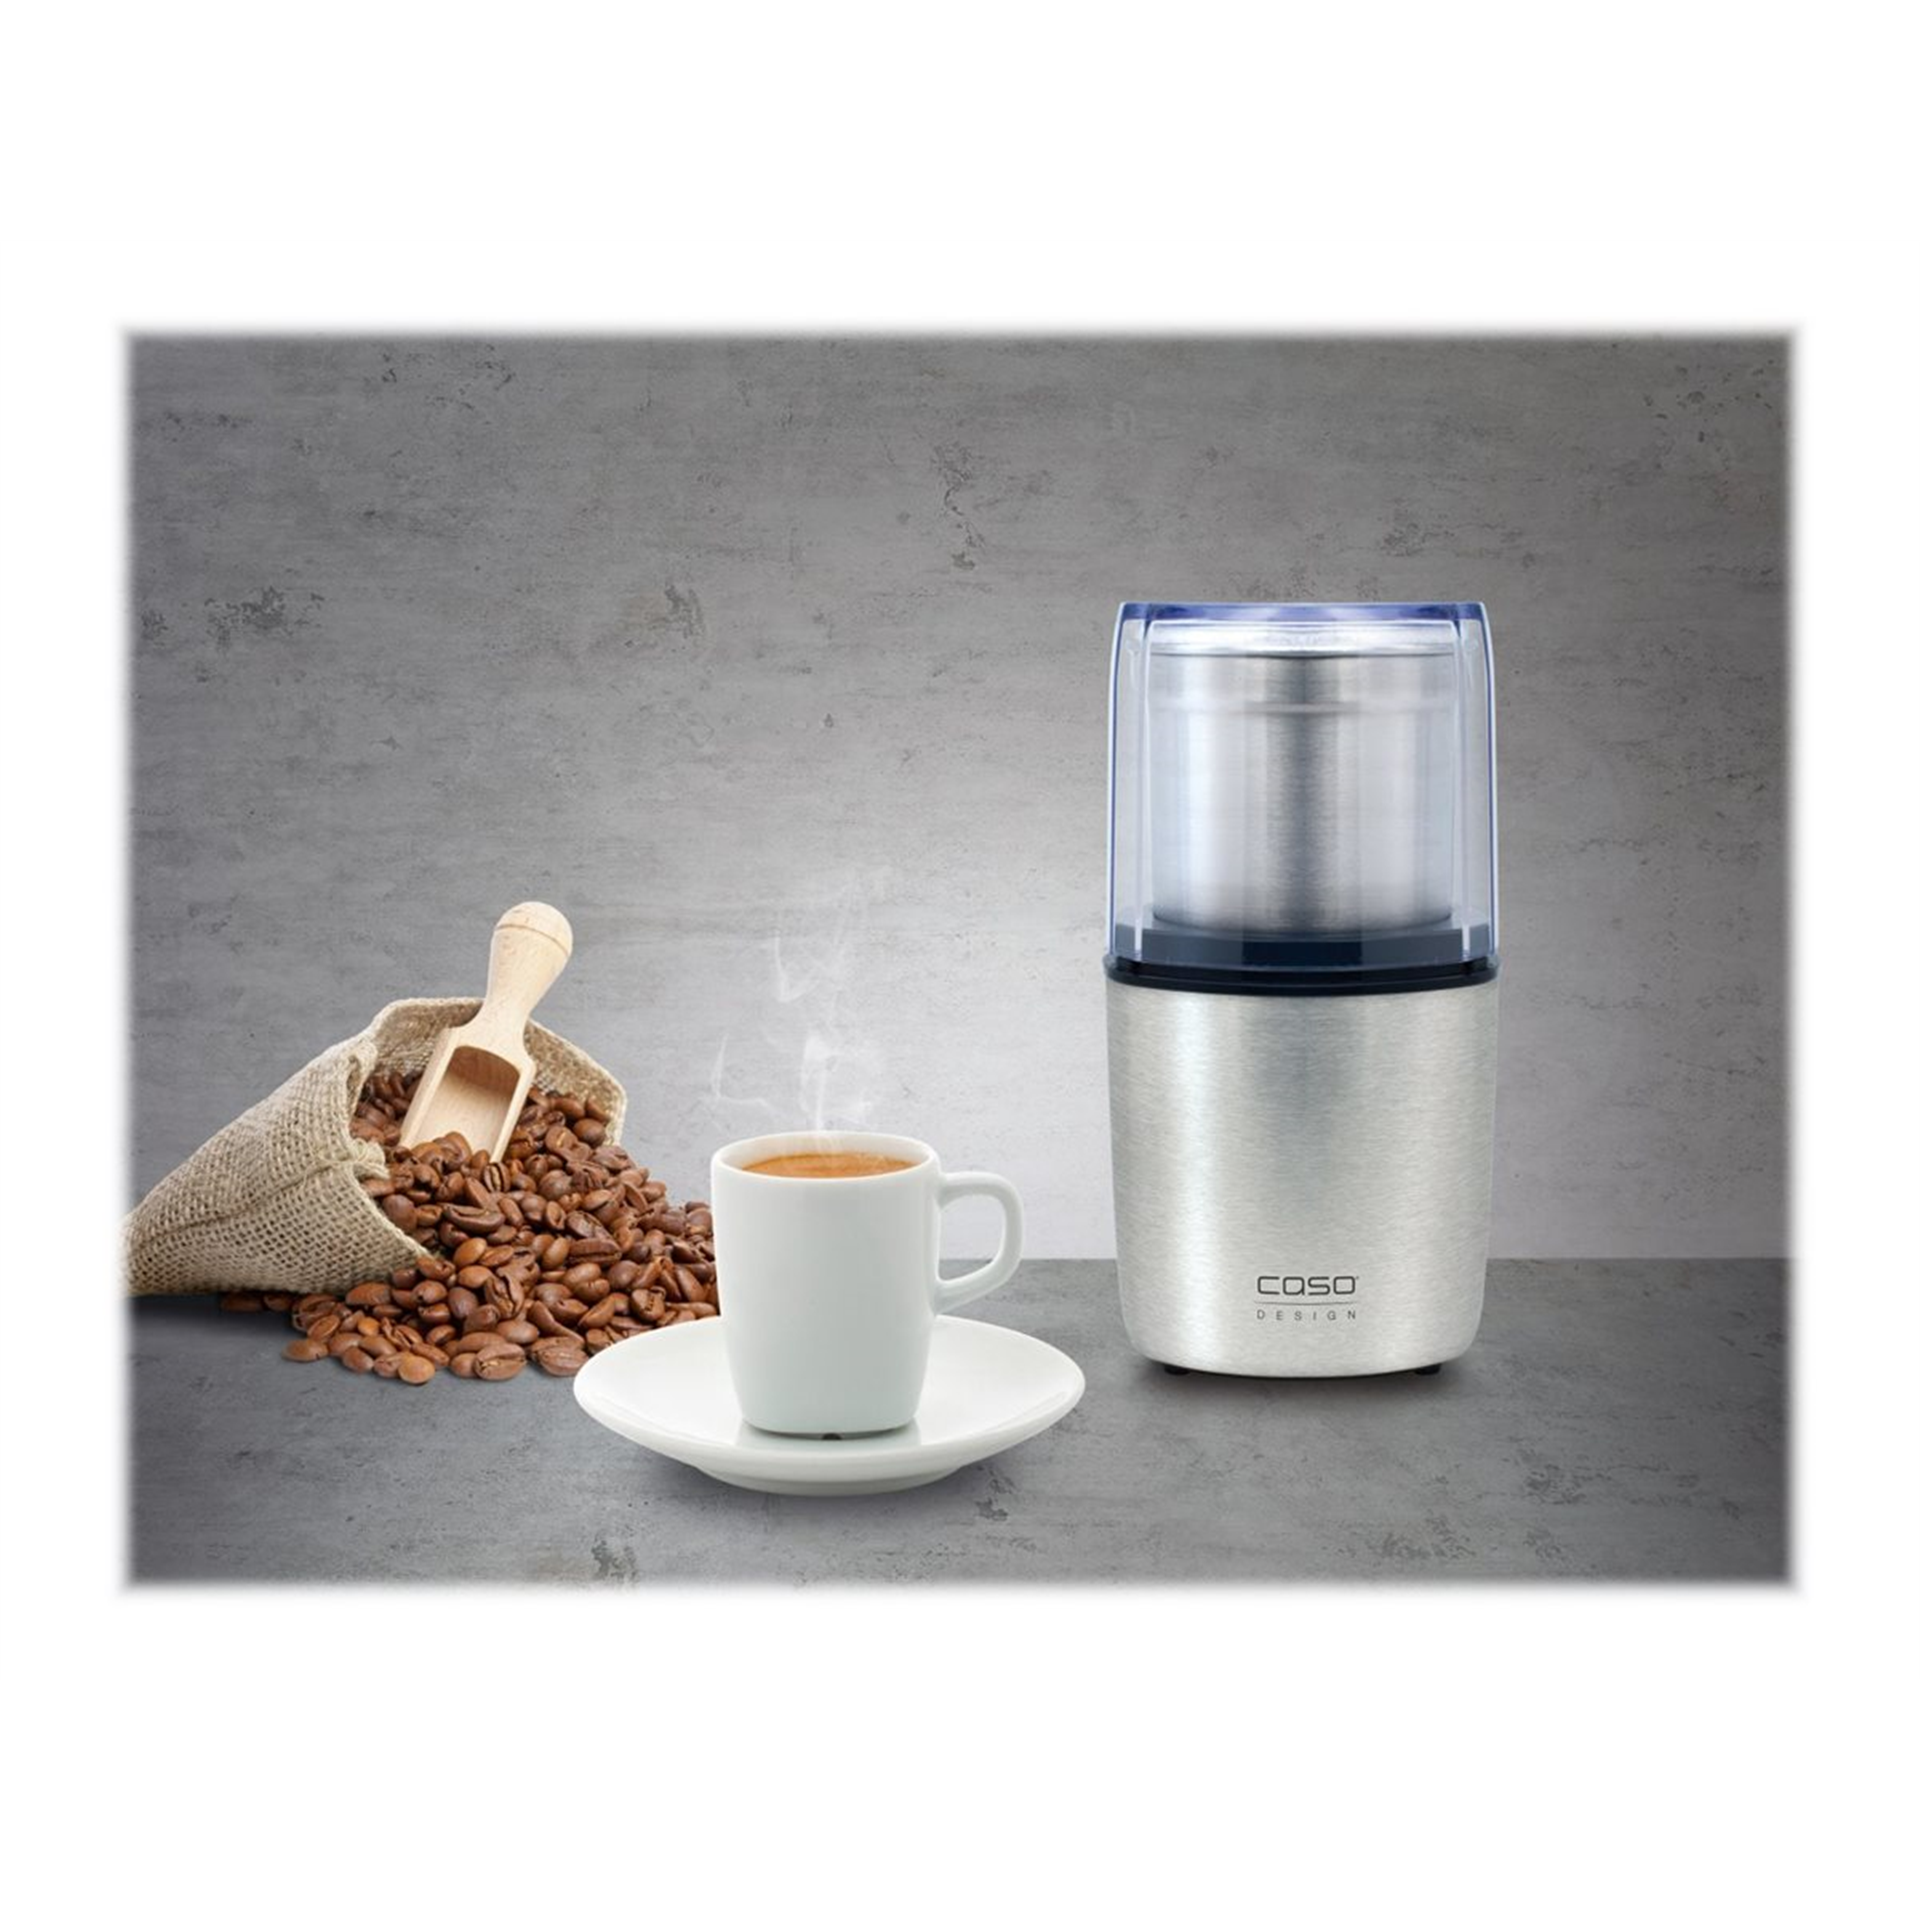 Caso Electric coffee grinder 1830 200 W W Number of cups 8 pc(s) Lid safety switch Stainless steel